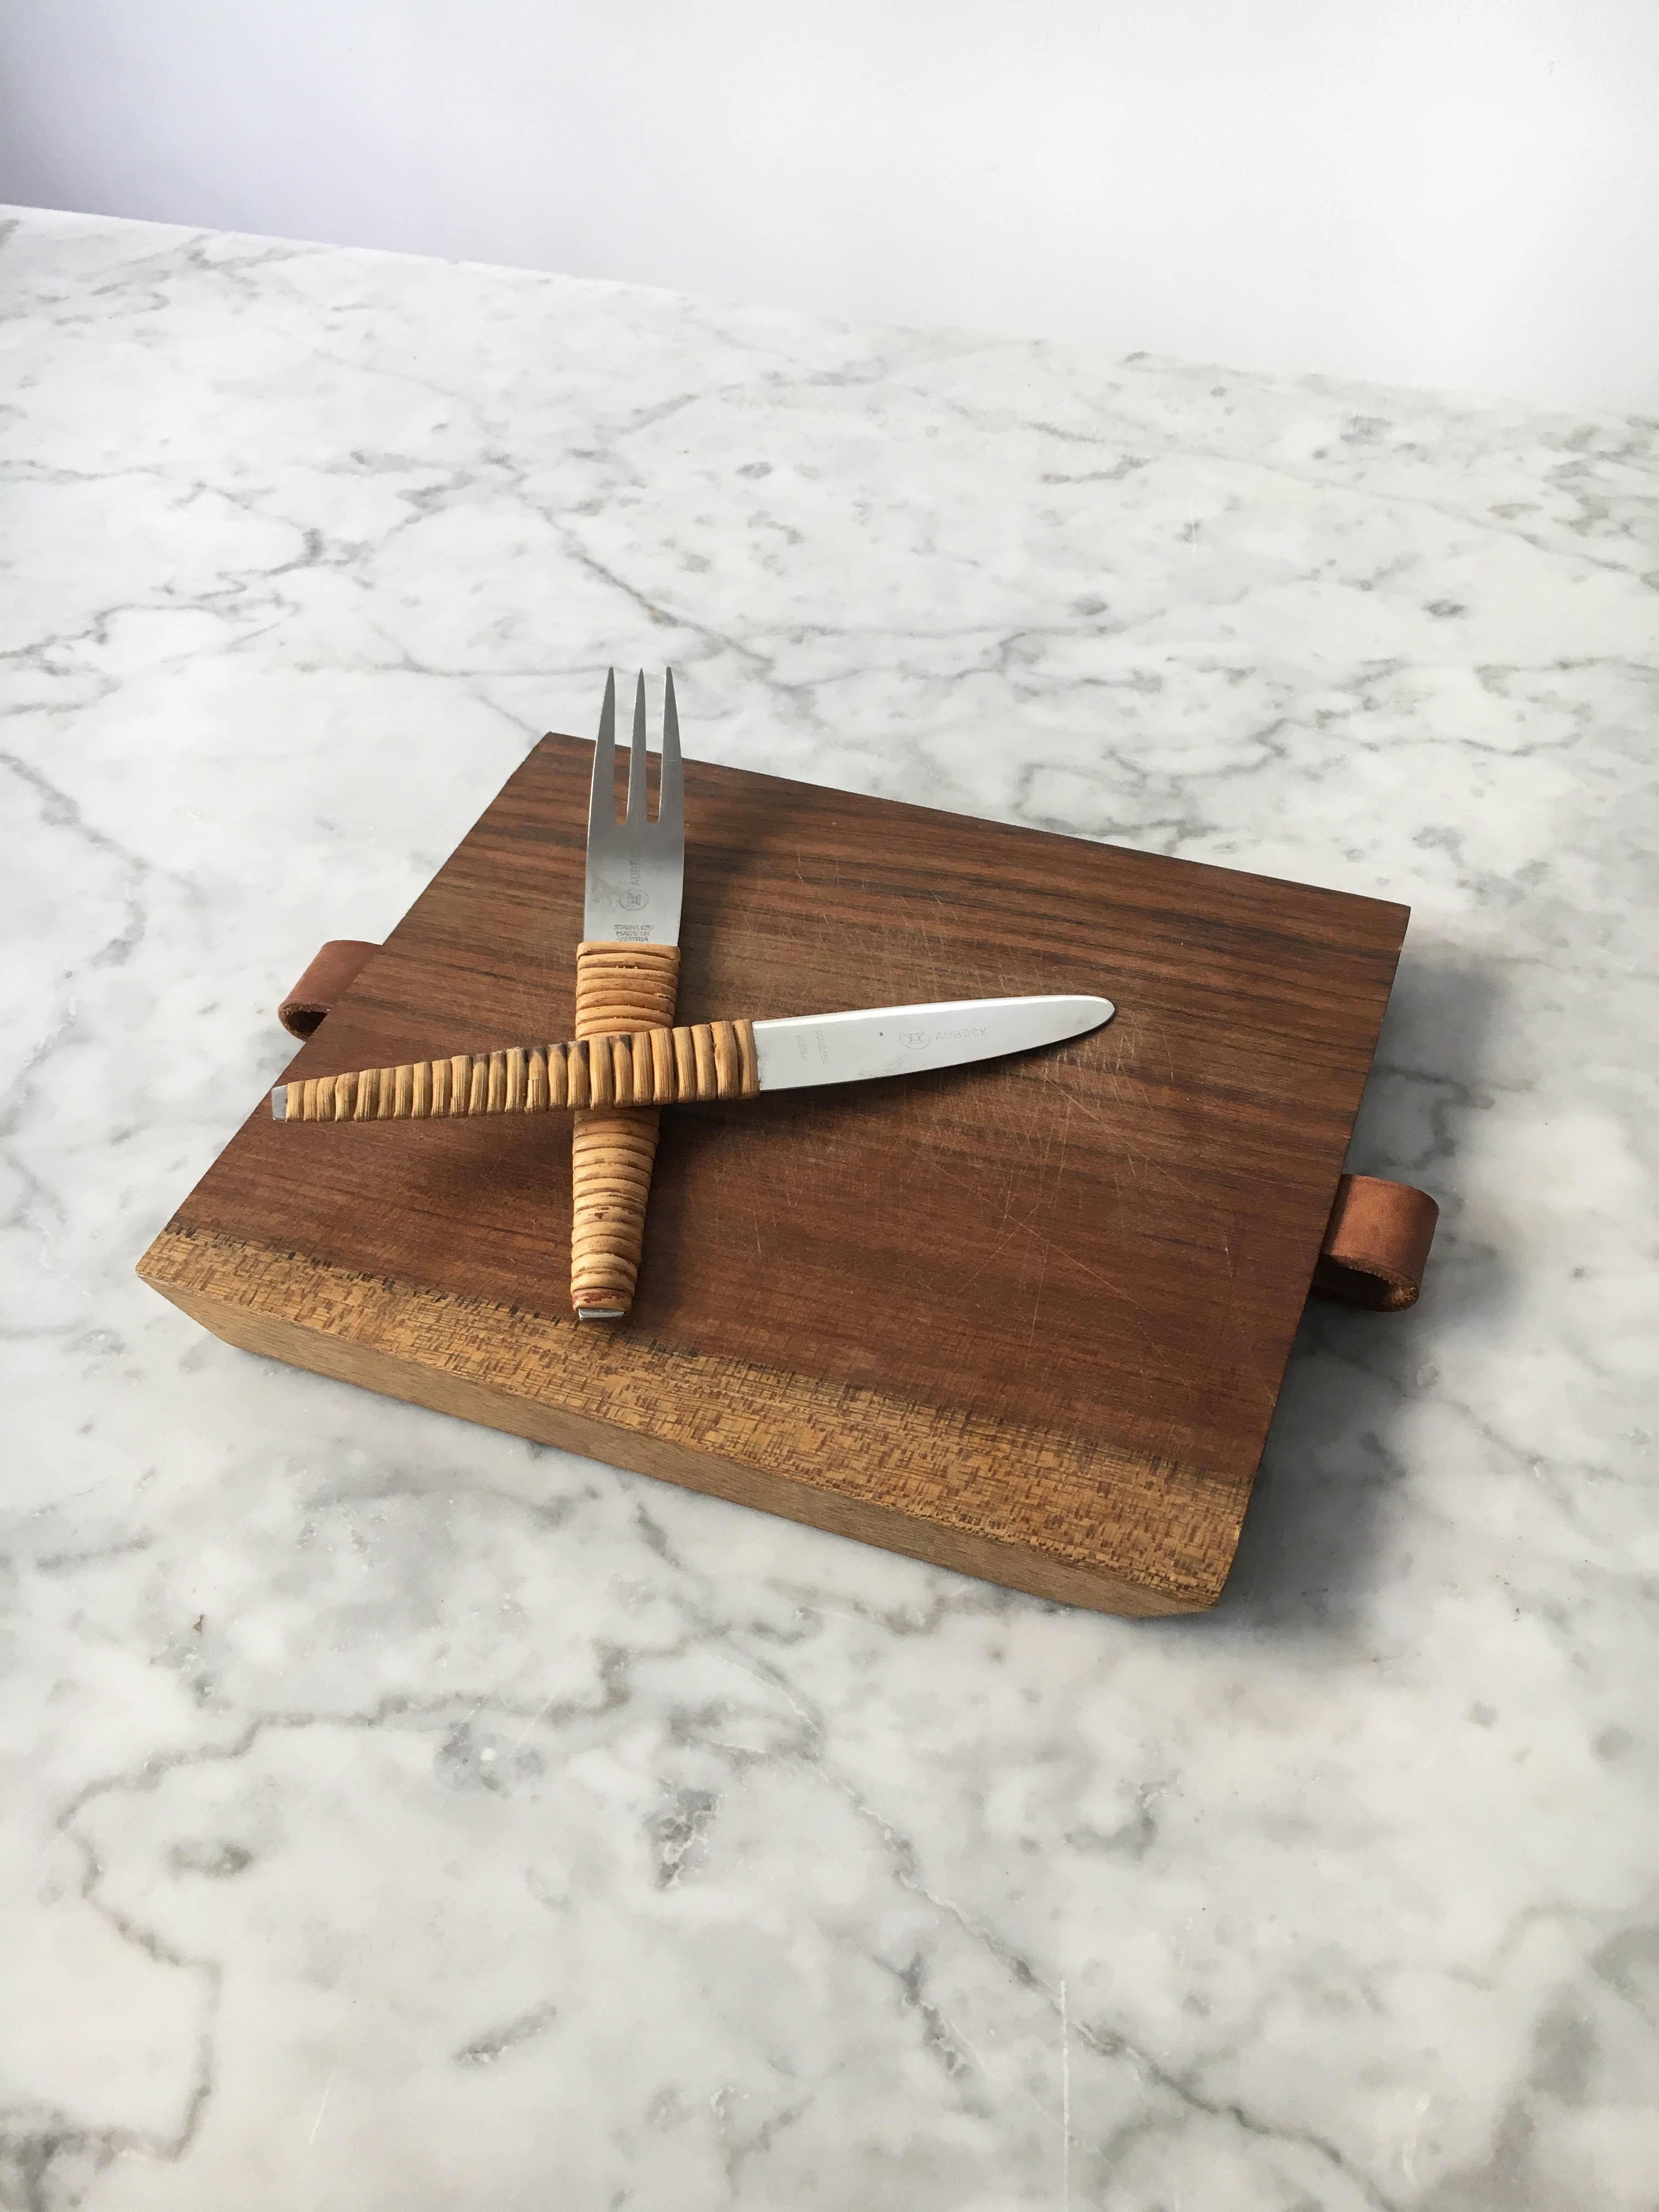 Stainless Steel Carl Auböck Picnic Board with Knife and Fork, Austria, 1950s For Sale